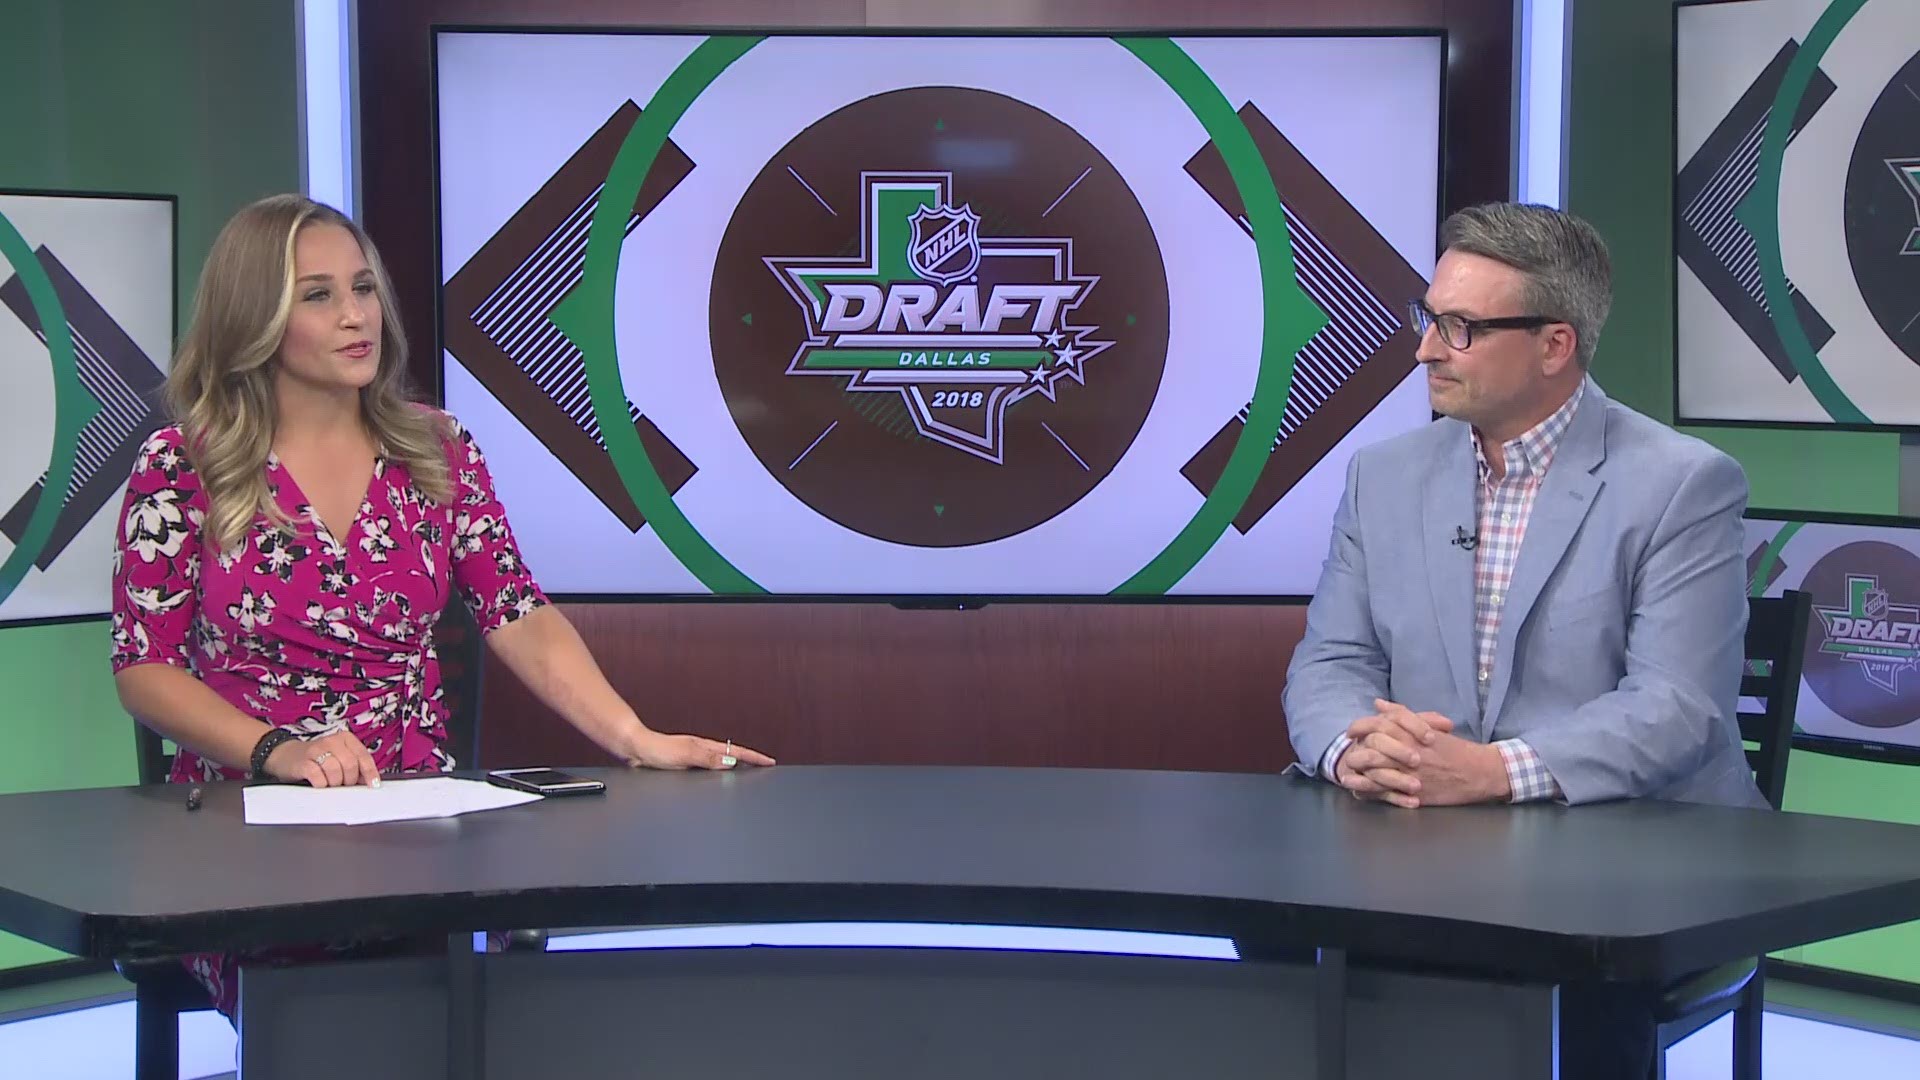 Kris Baker from the Athletic joins Heather Prusak to preview the 2018 NHL draft.